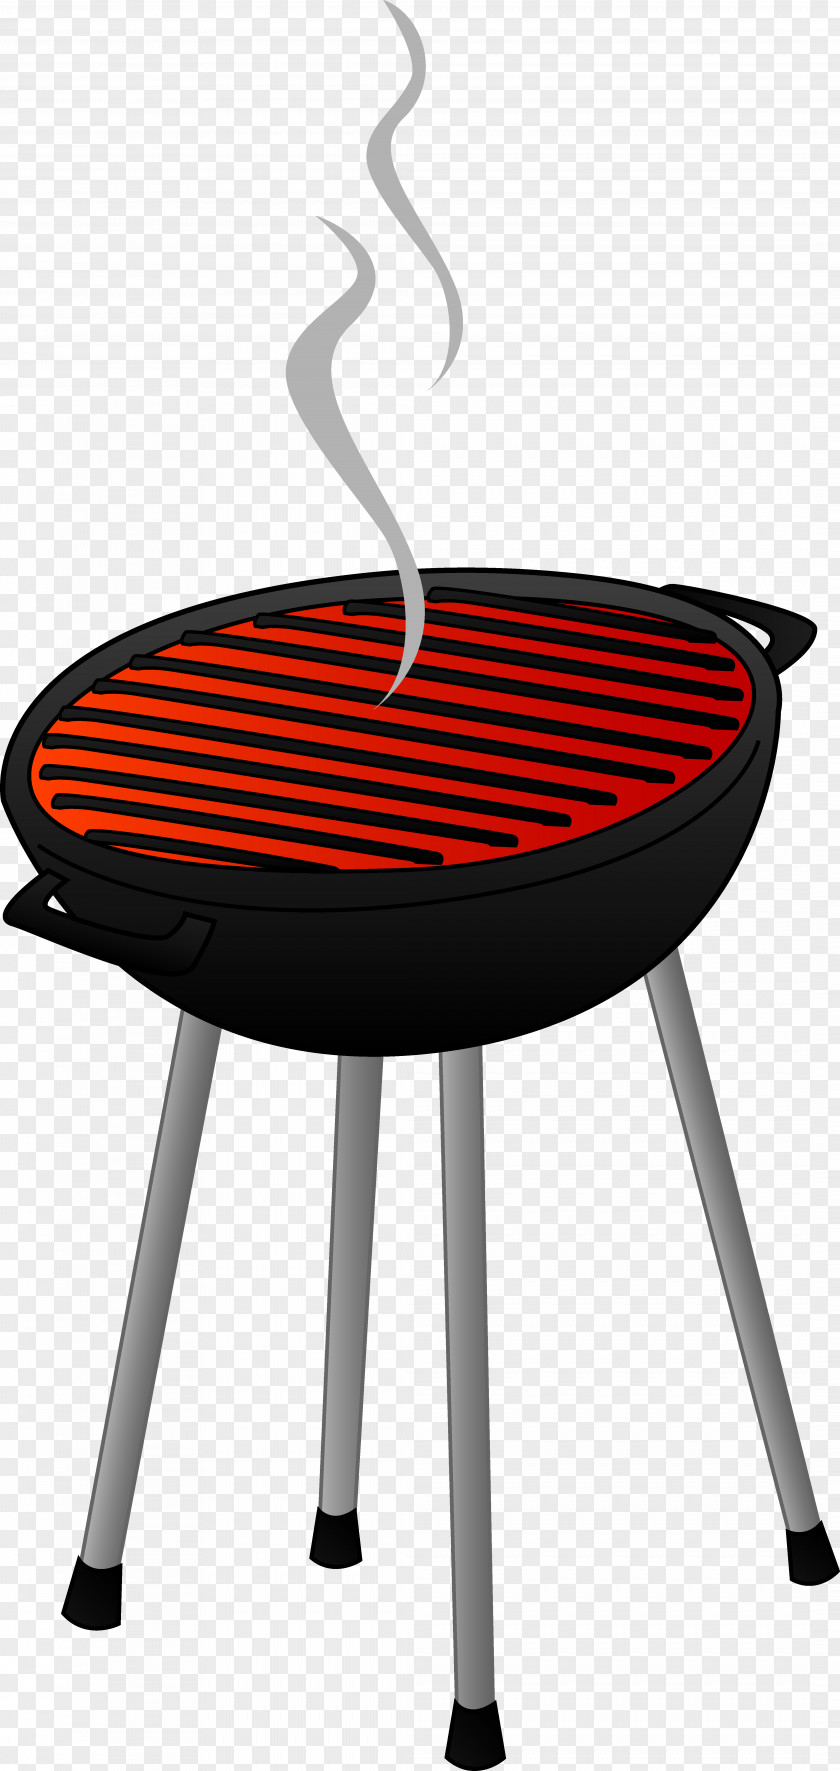 Utensils Barbecue Sauce Grilling Clip Art PNG